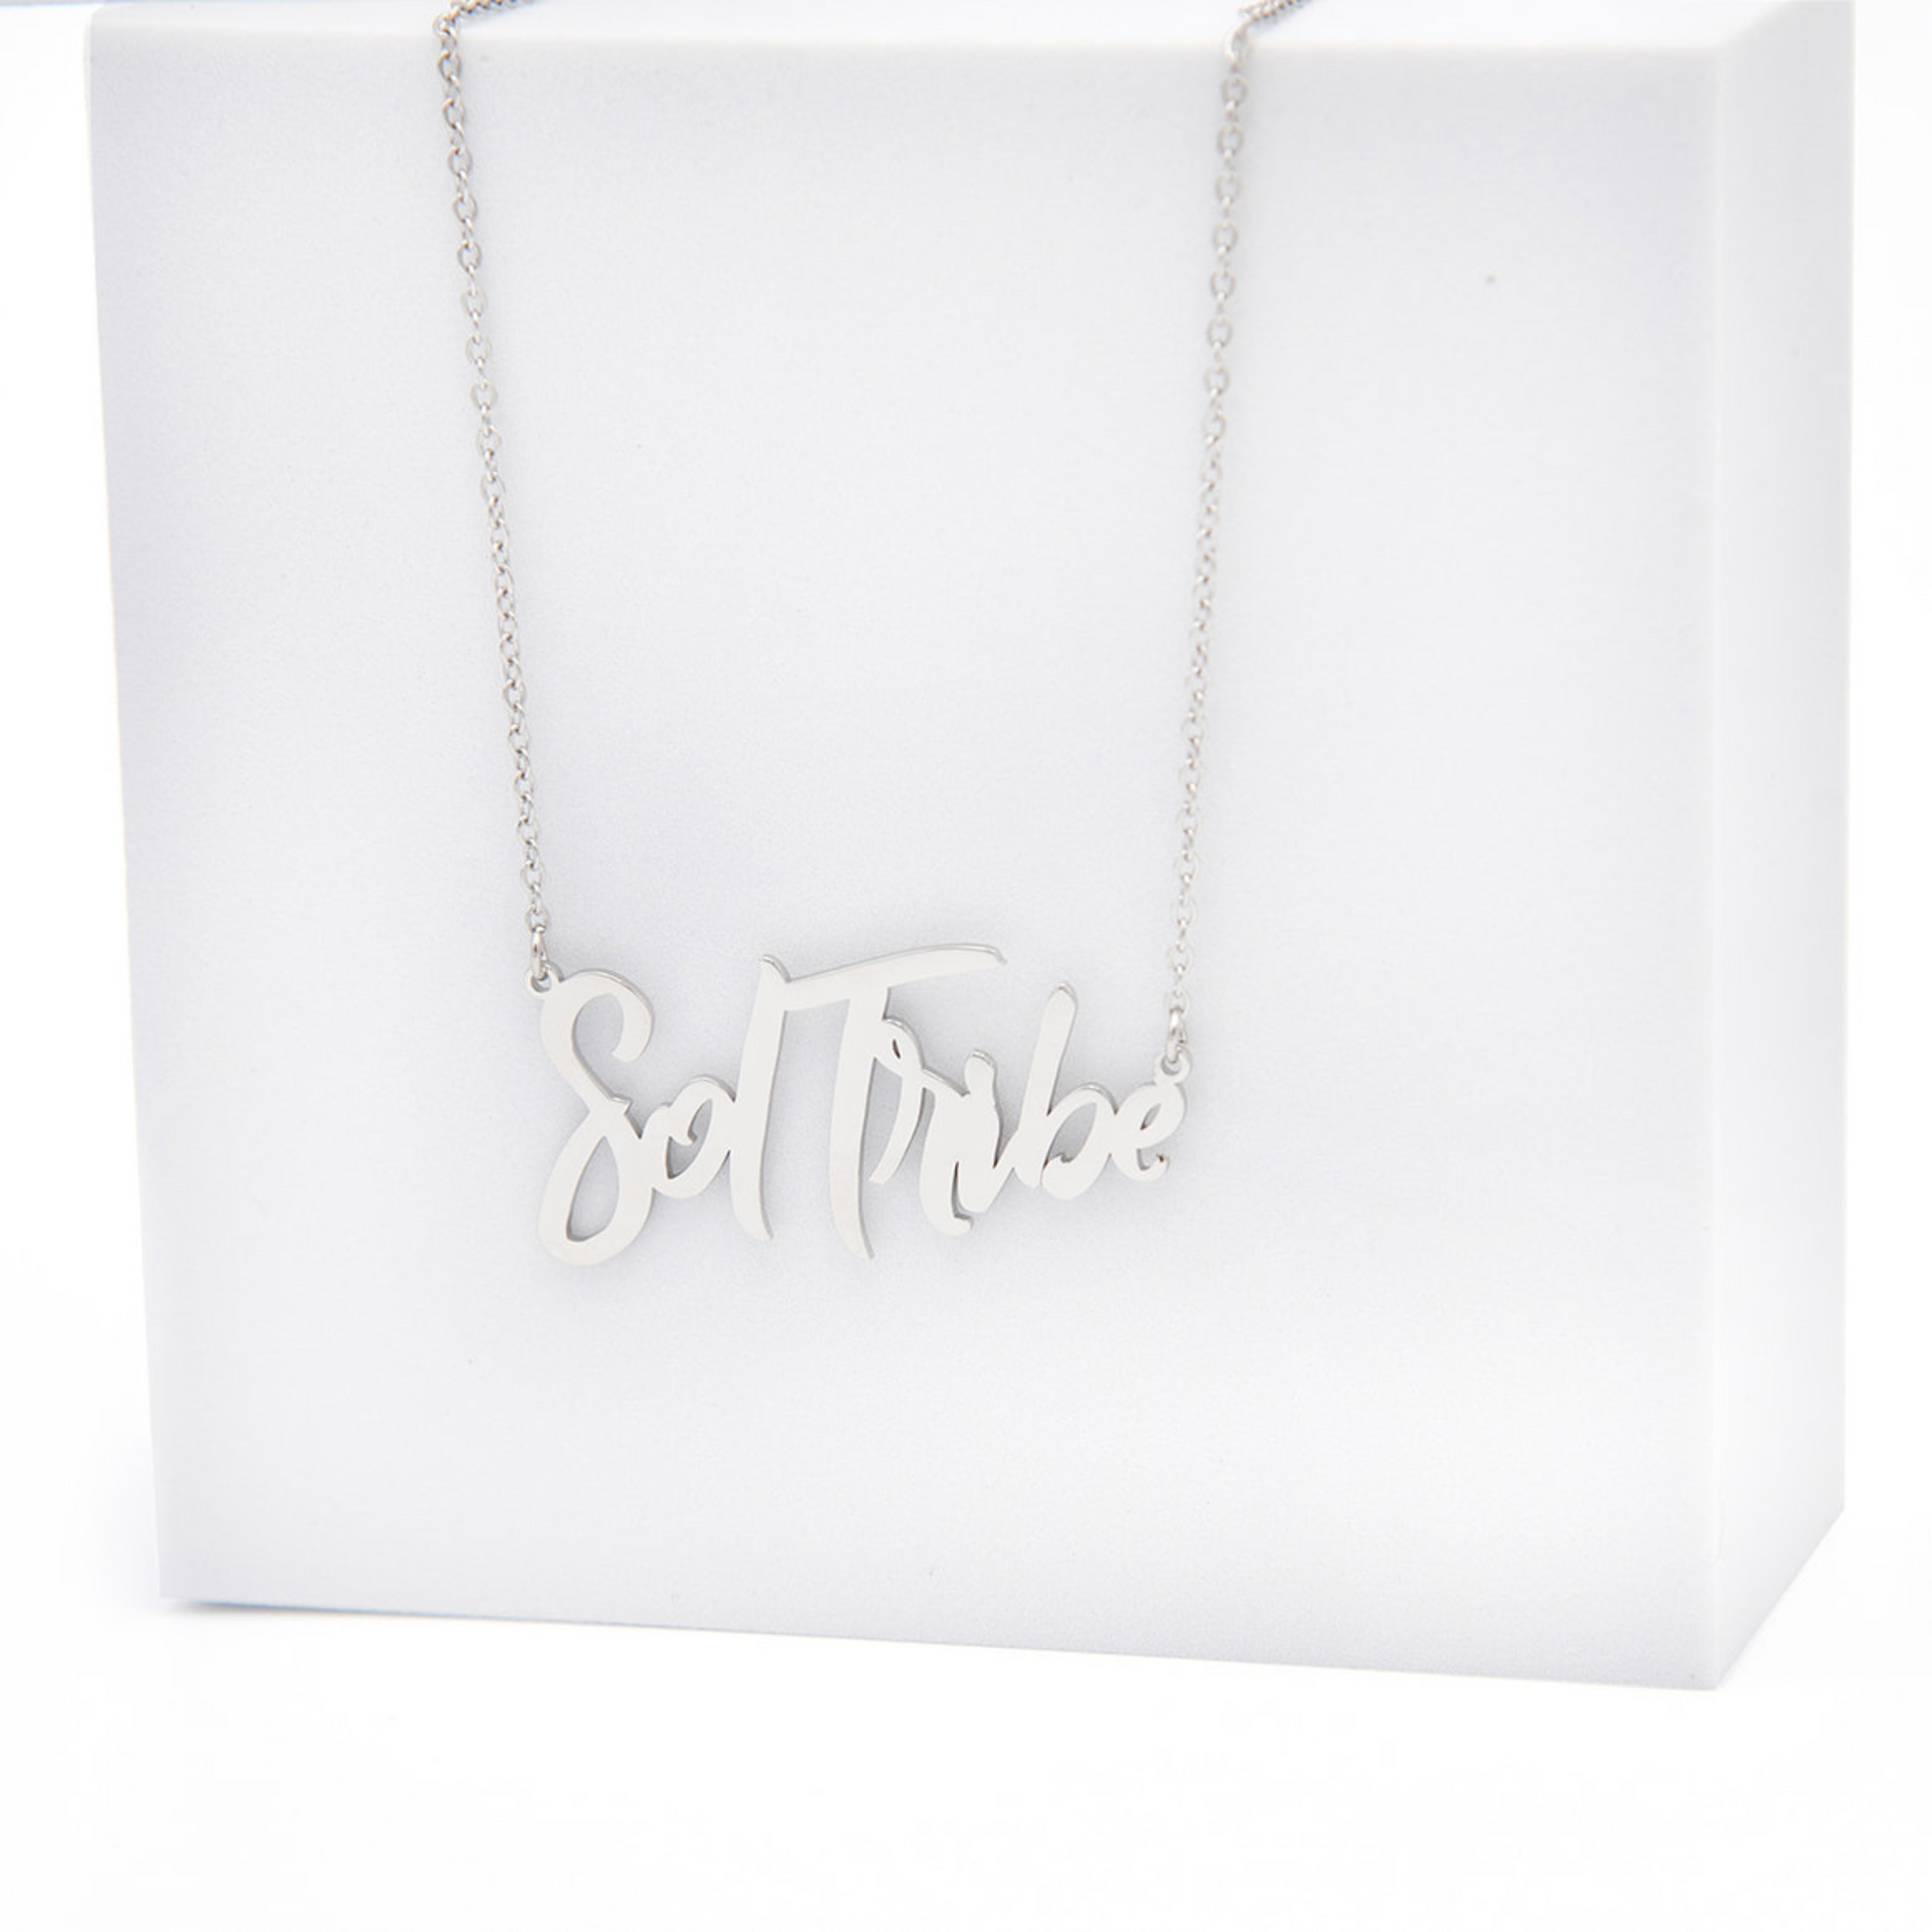 silver soltribe affirmation necklace from sol rise essentials